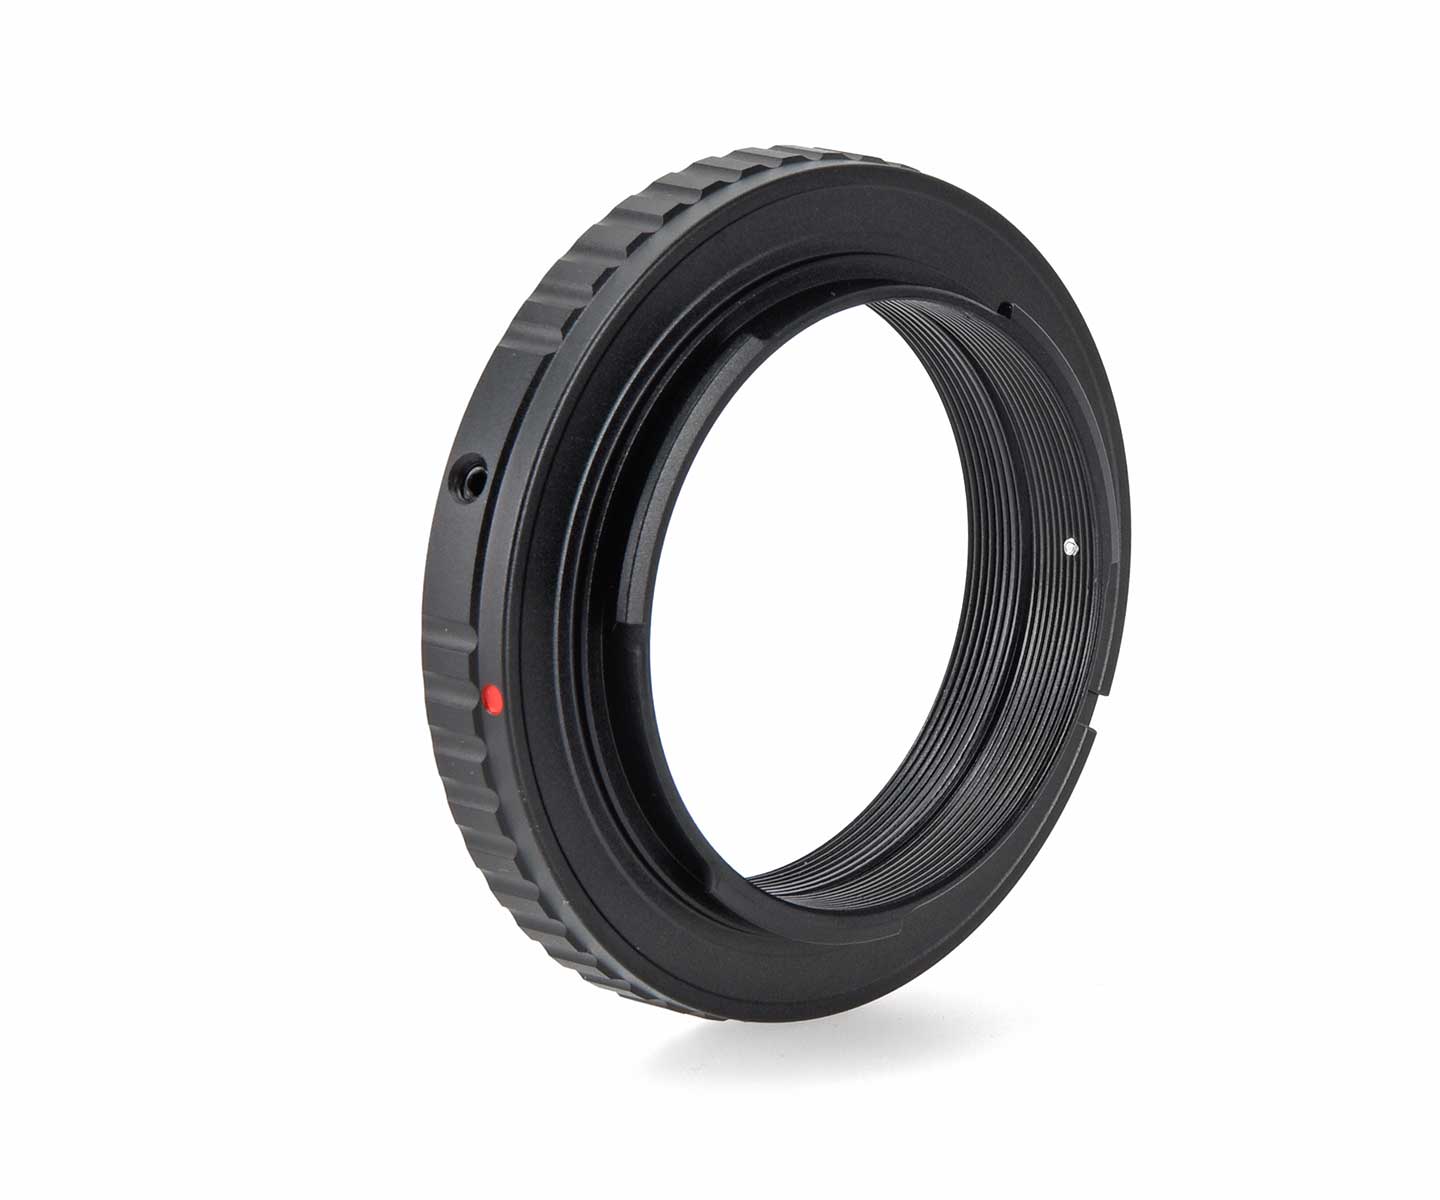  TS short T2 adapter for connecting Sony Nex and Sony Alpha cameras to telescopes and camera lenses [EN] 